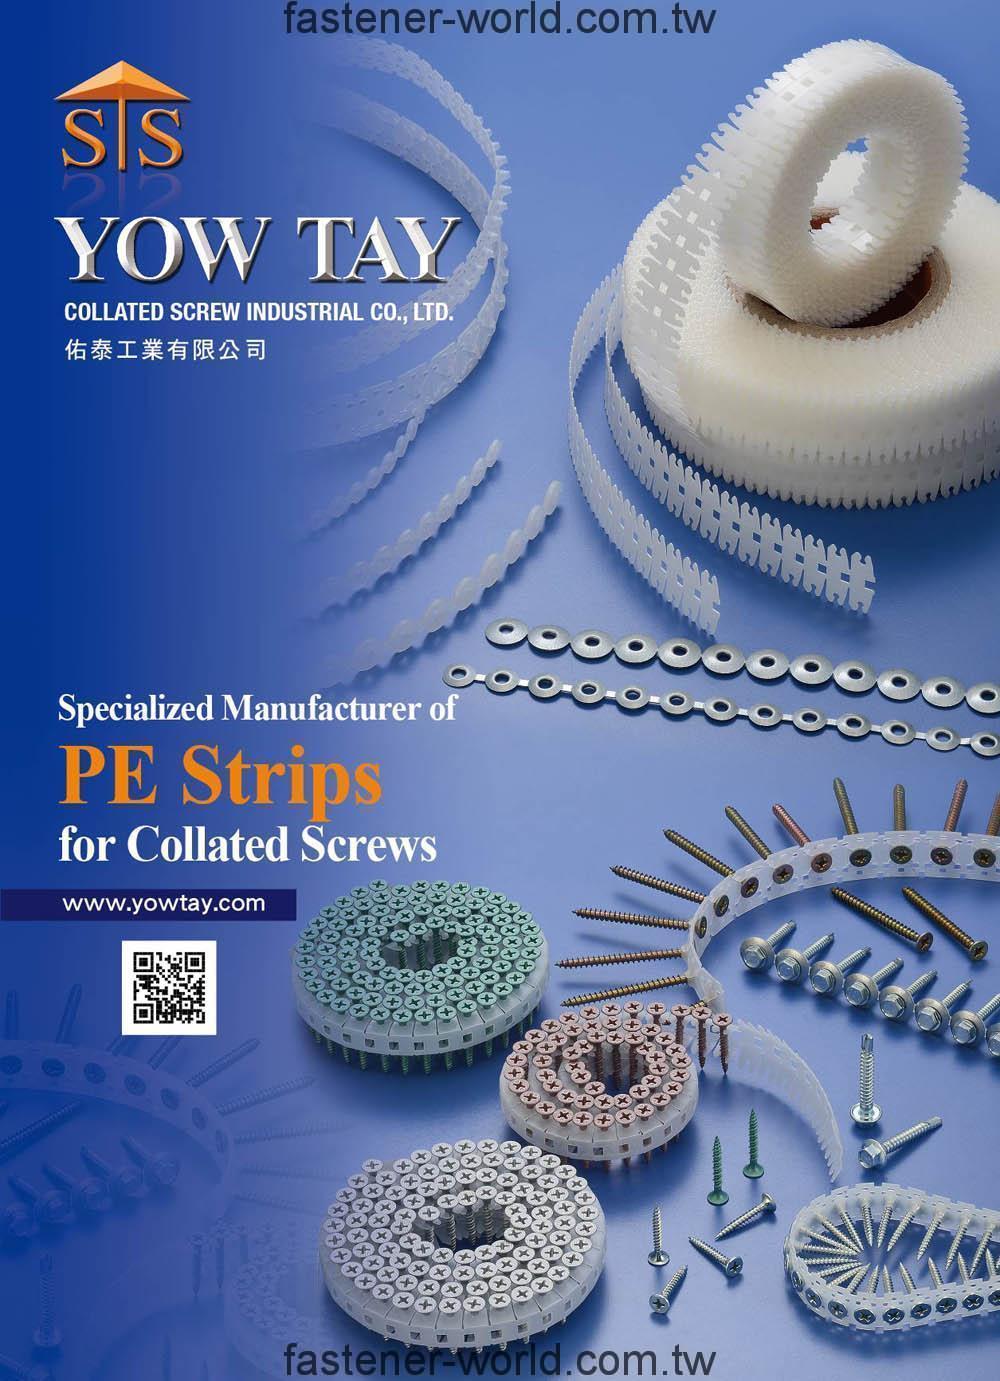 YOW TAY COLLATED SCREW INDUSTRIAL CO., LTD. Online Catalogues